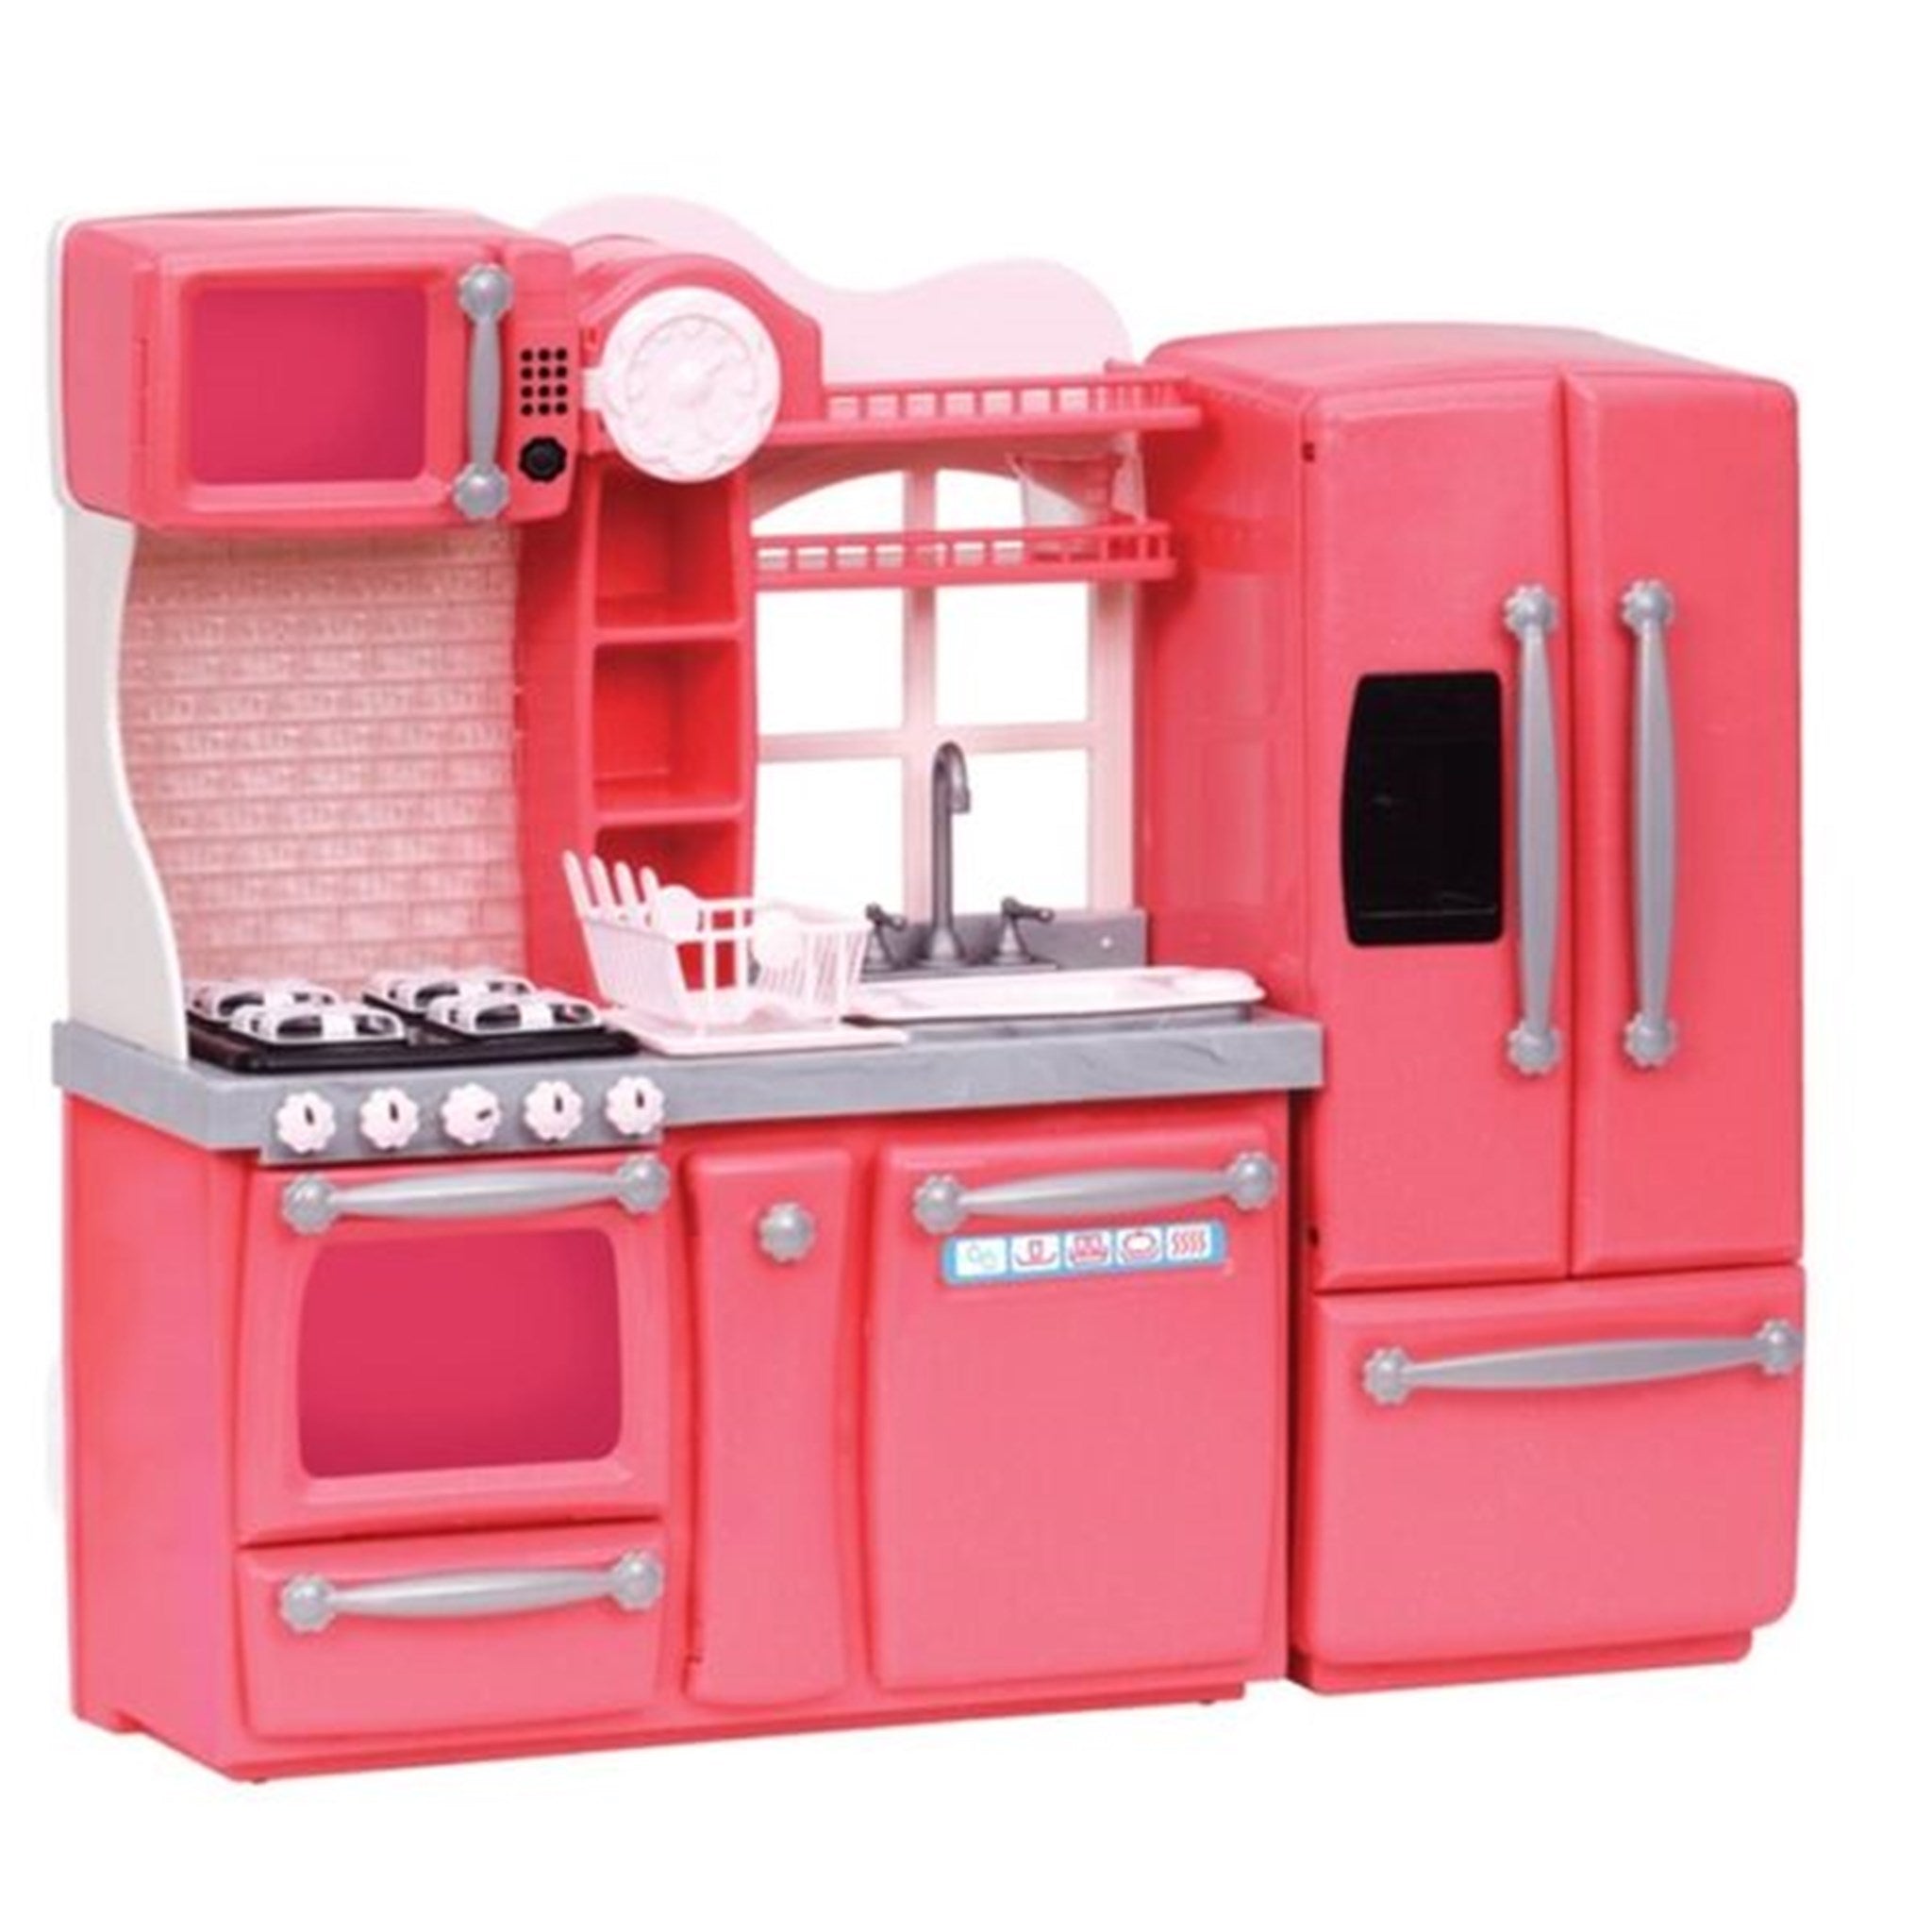 Our Generation Kitchen Pink